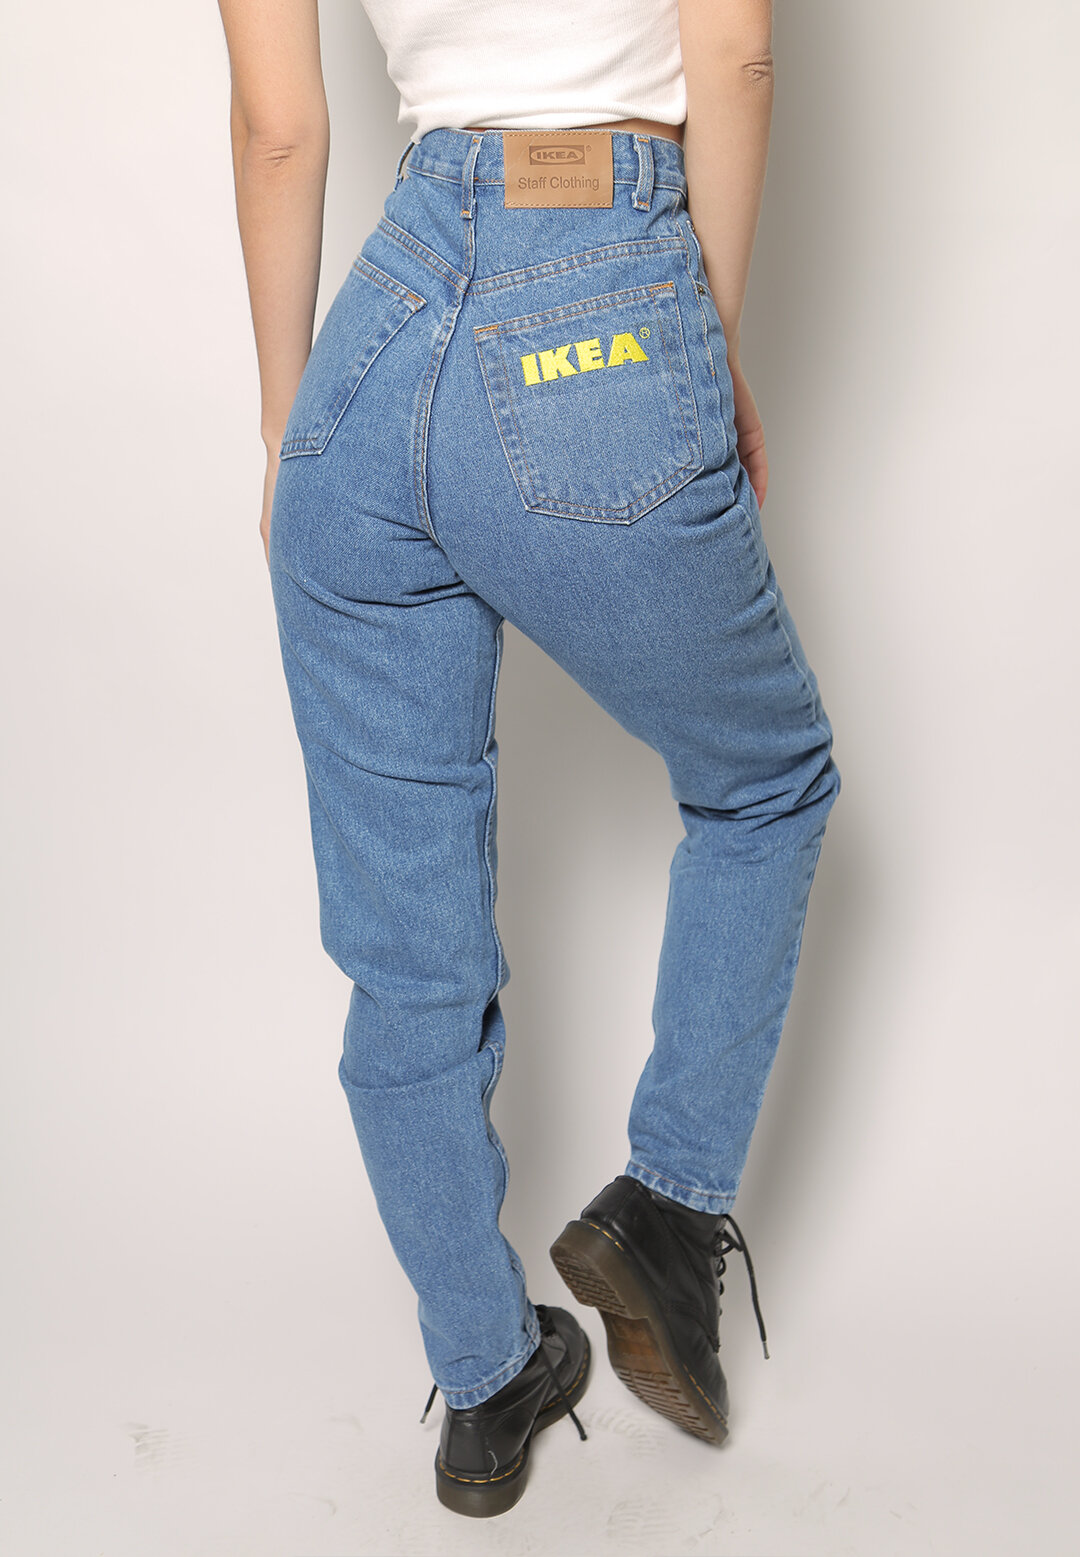 deadstock 98's staff jeans reworked vintage much more!